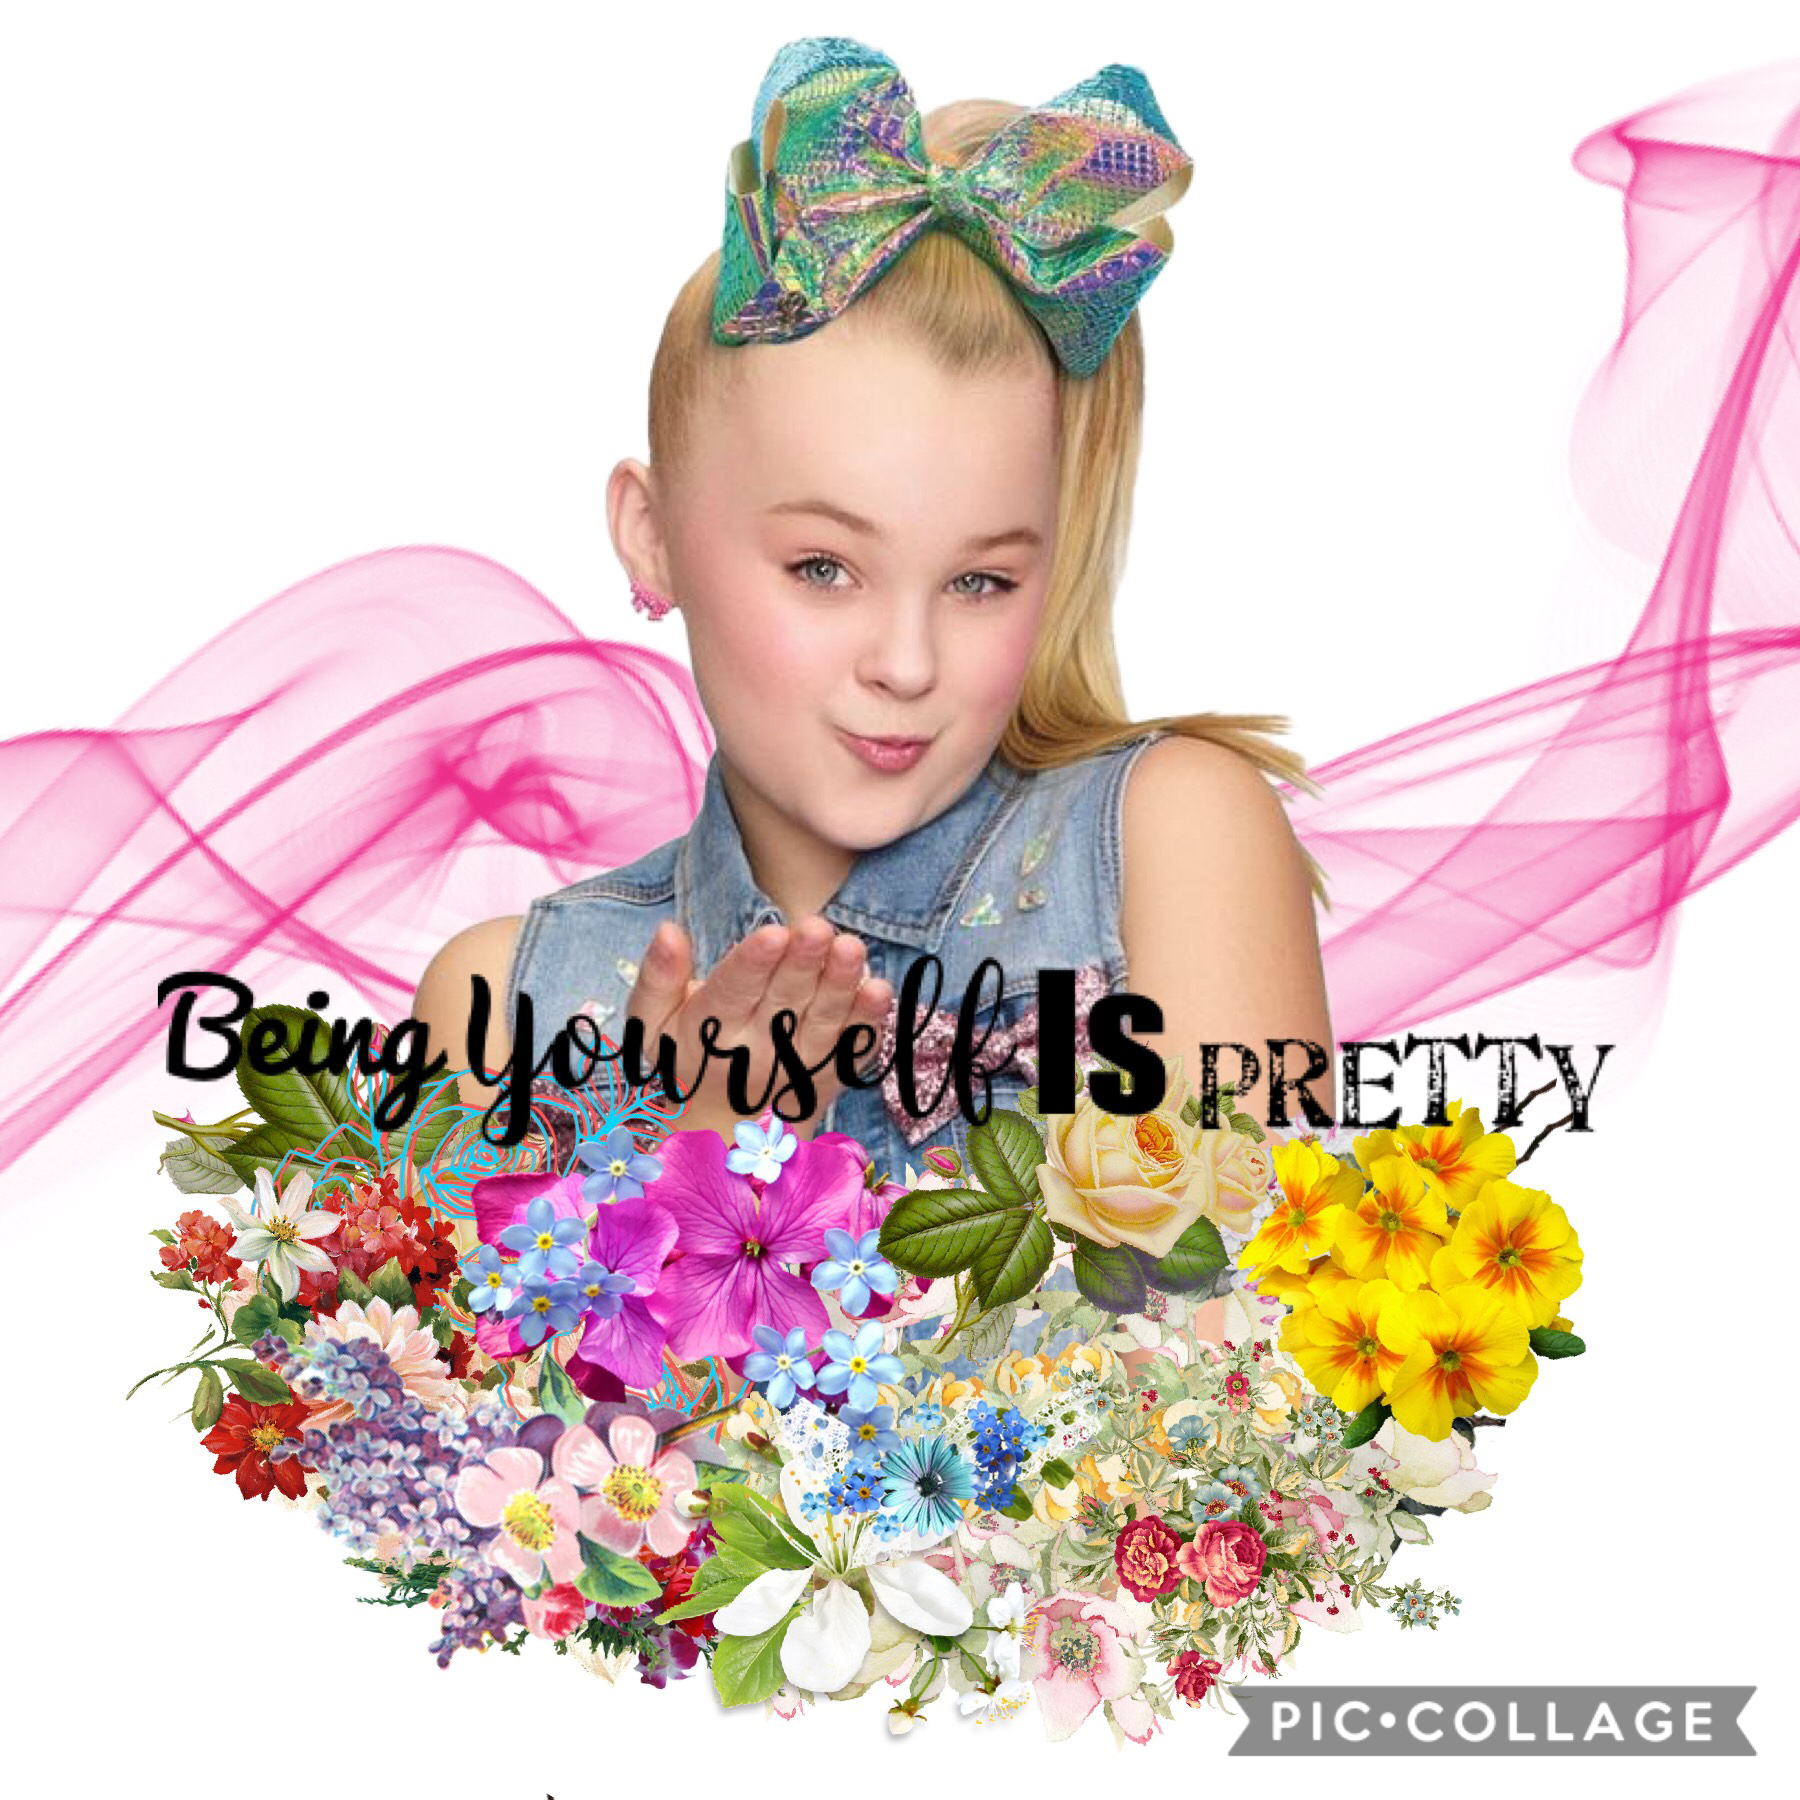 Tap
 
QOTD: which emoji 🌼 or 🦋
AOTD: 🌼
This collage is inspired by foxygirl22 
Sorry I haven’t been very active it was because of school and homework also have a great day!❤️